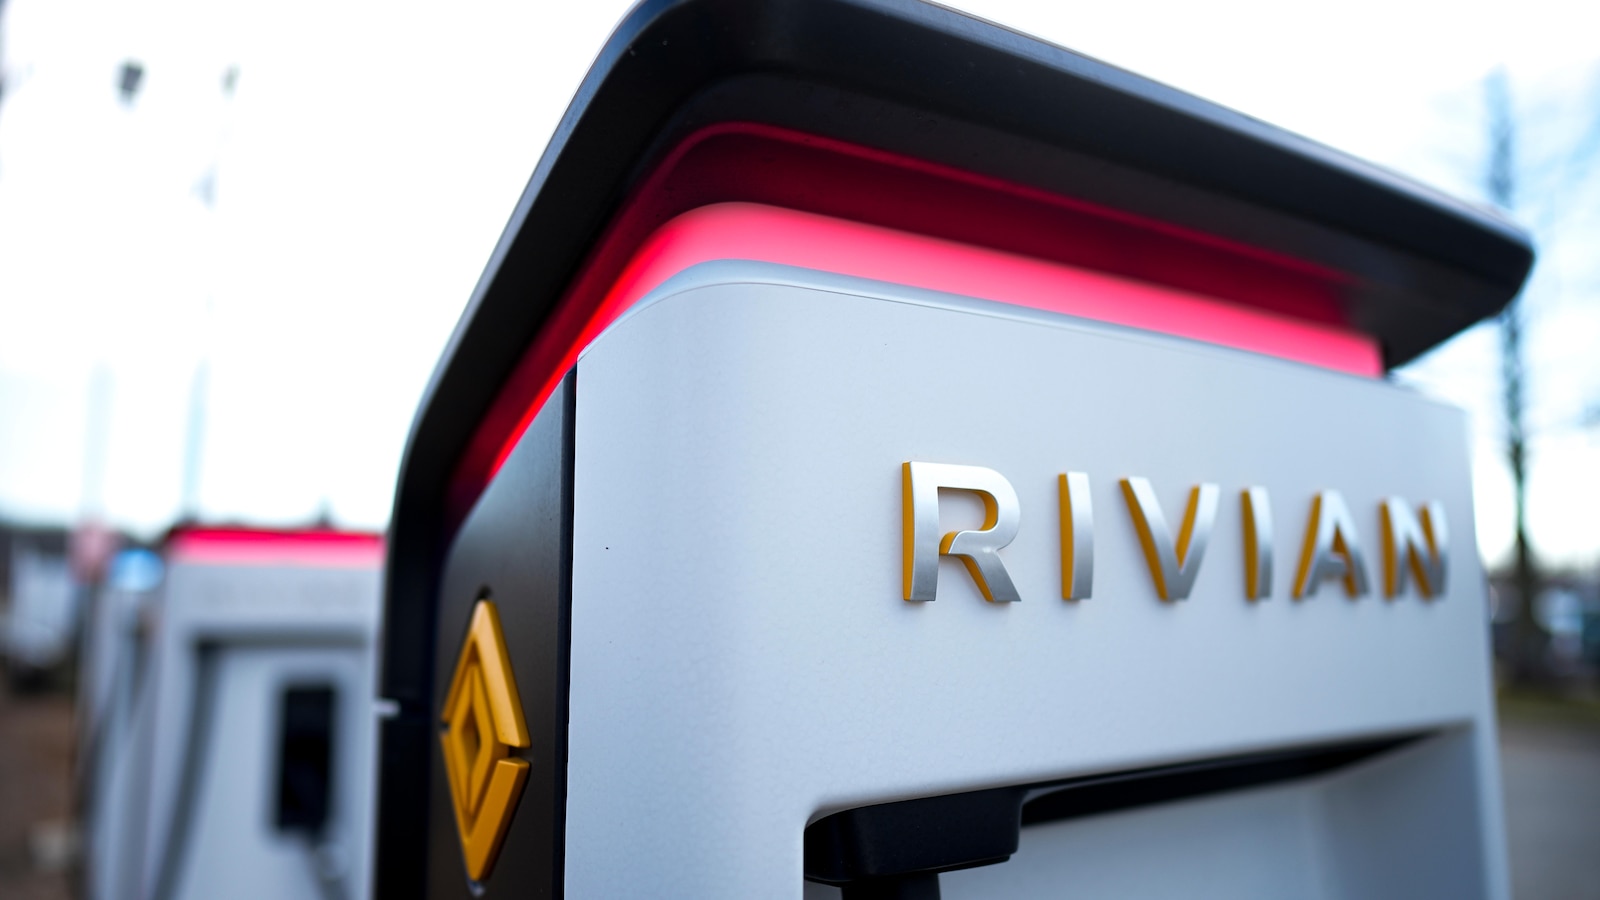 Volkswagen injects $1 billion into Rivian, causing shares to soar